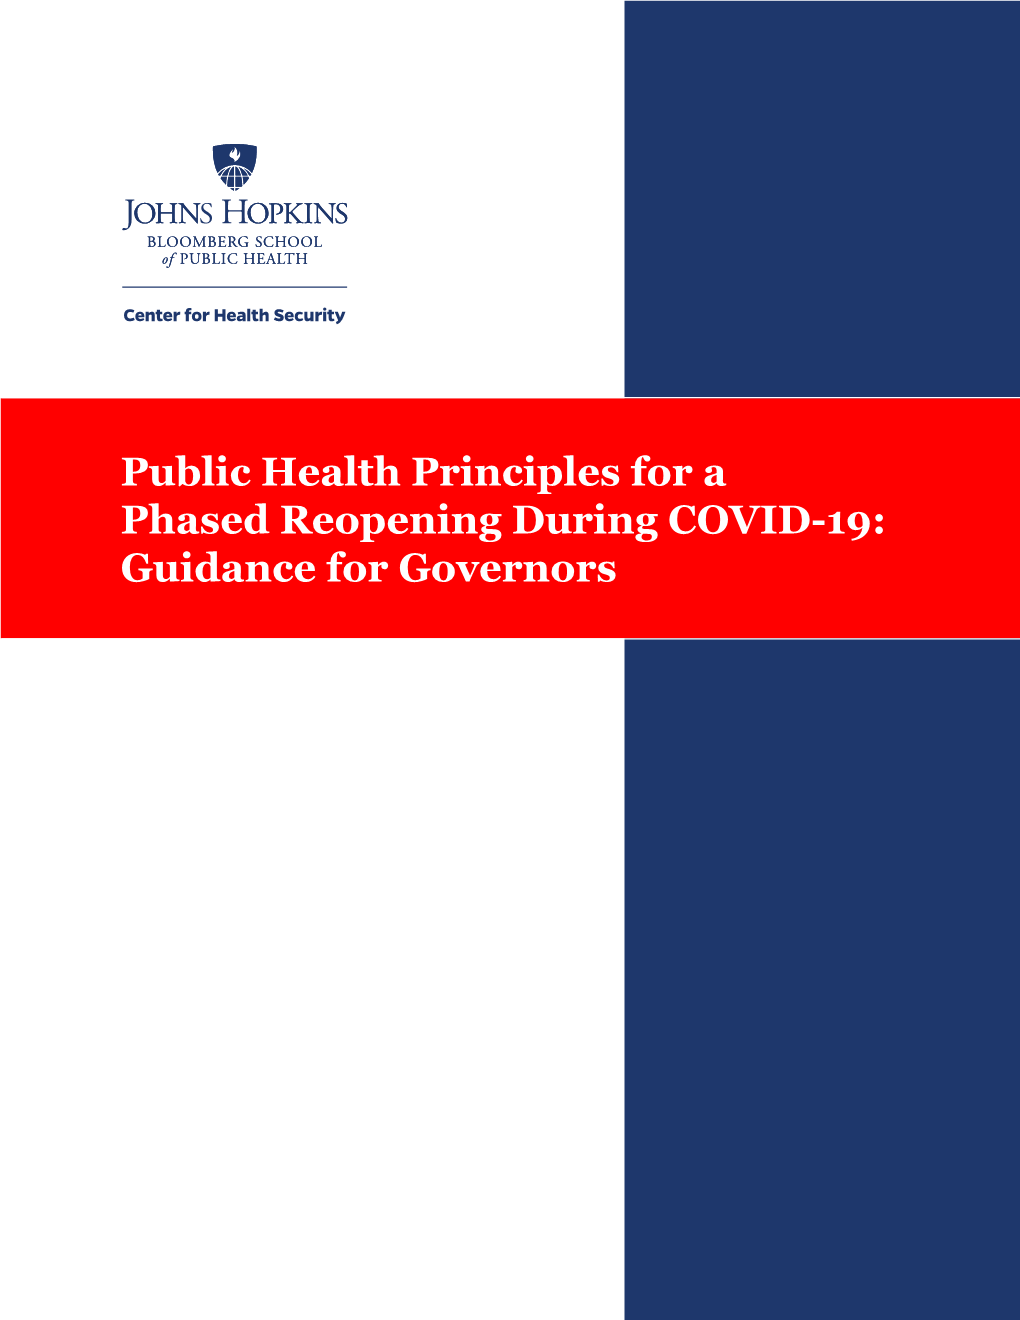 Public Health Principles for a Phased Reopening During COVID-19: Guidance for Governors AUTHORS